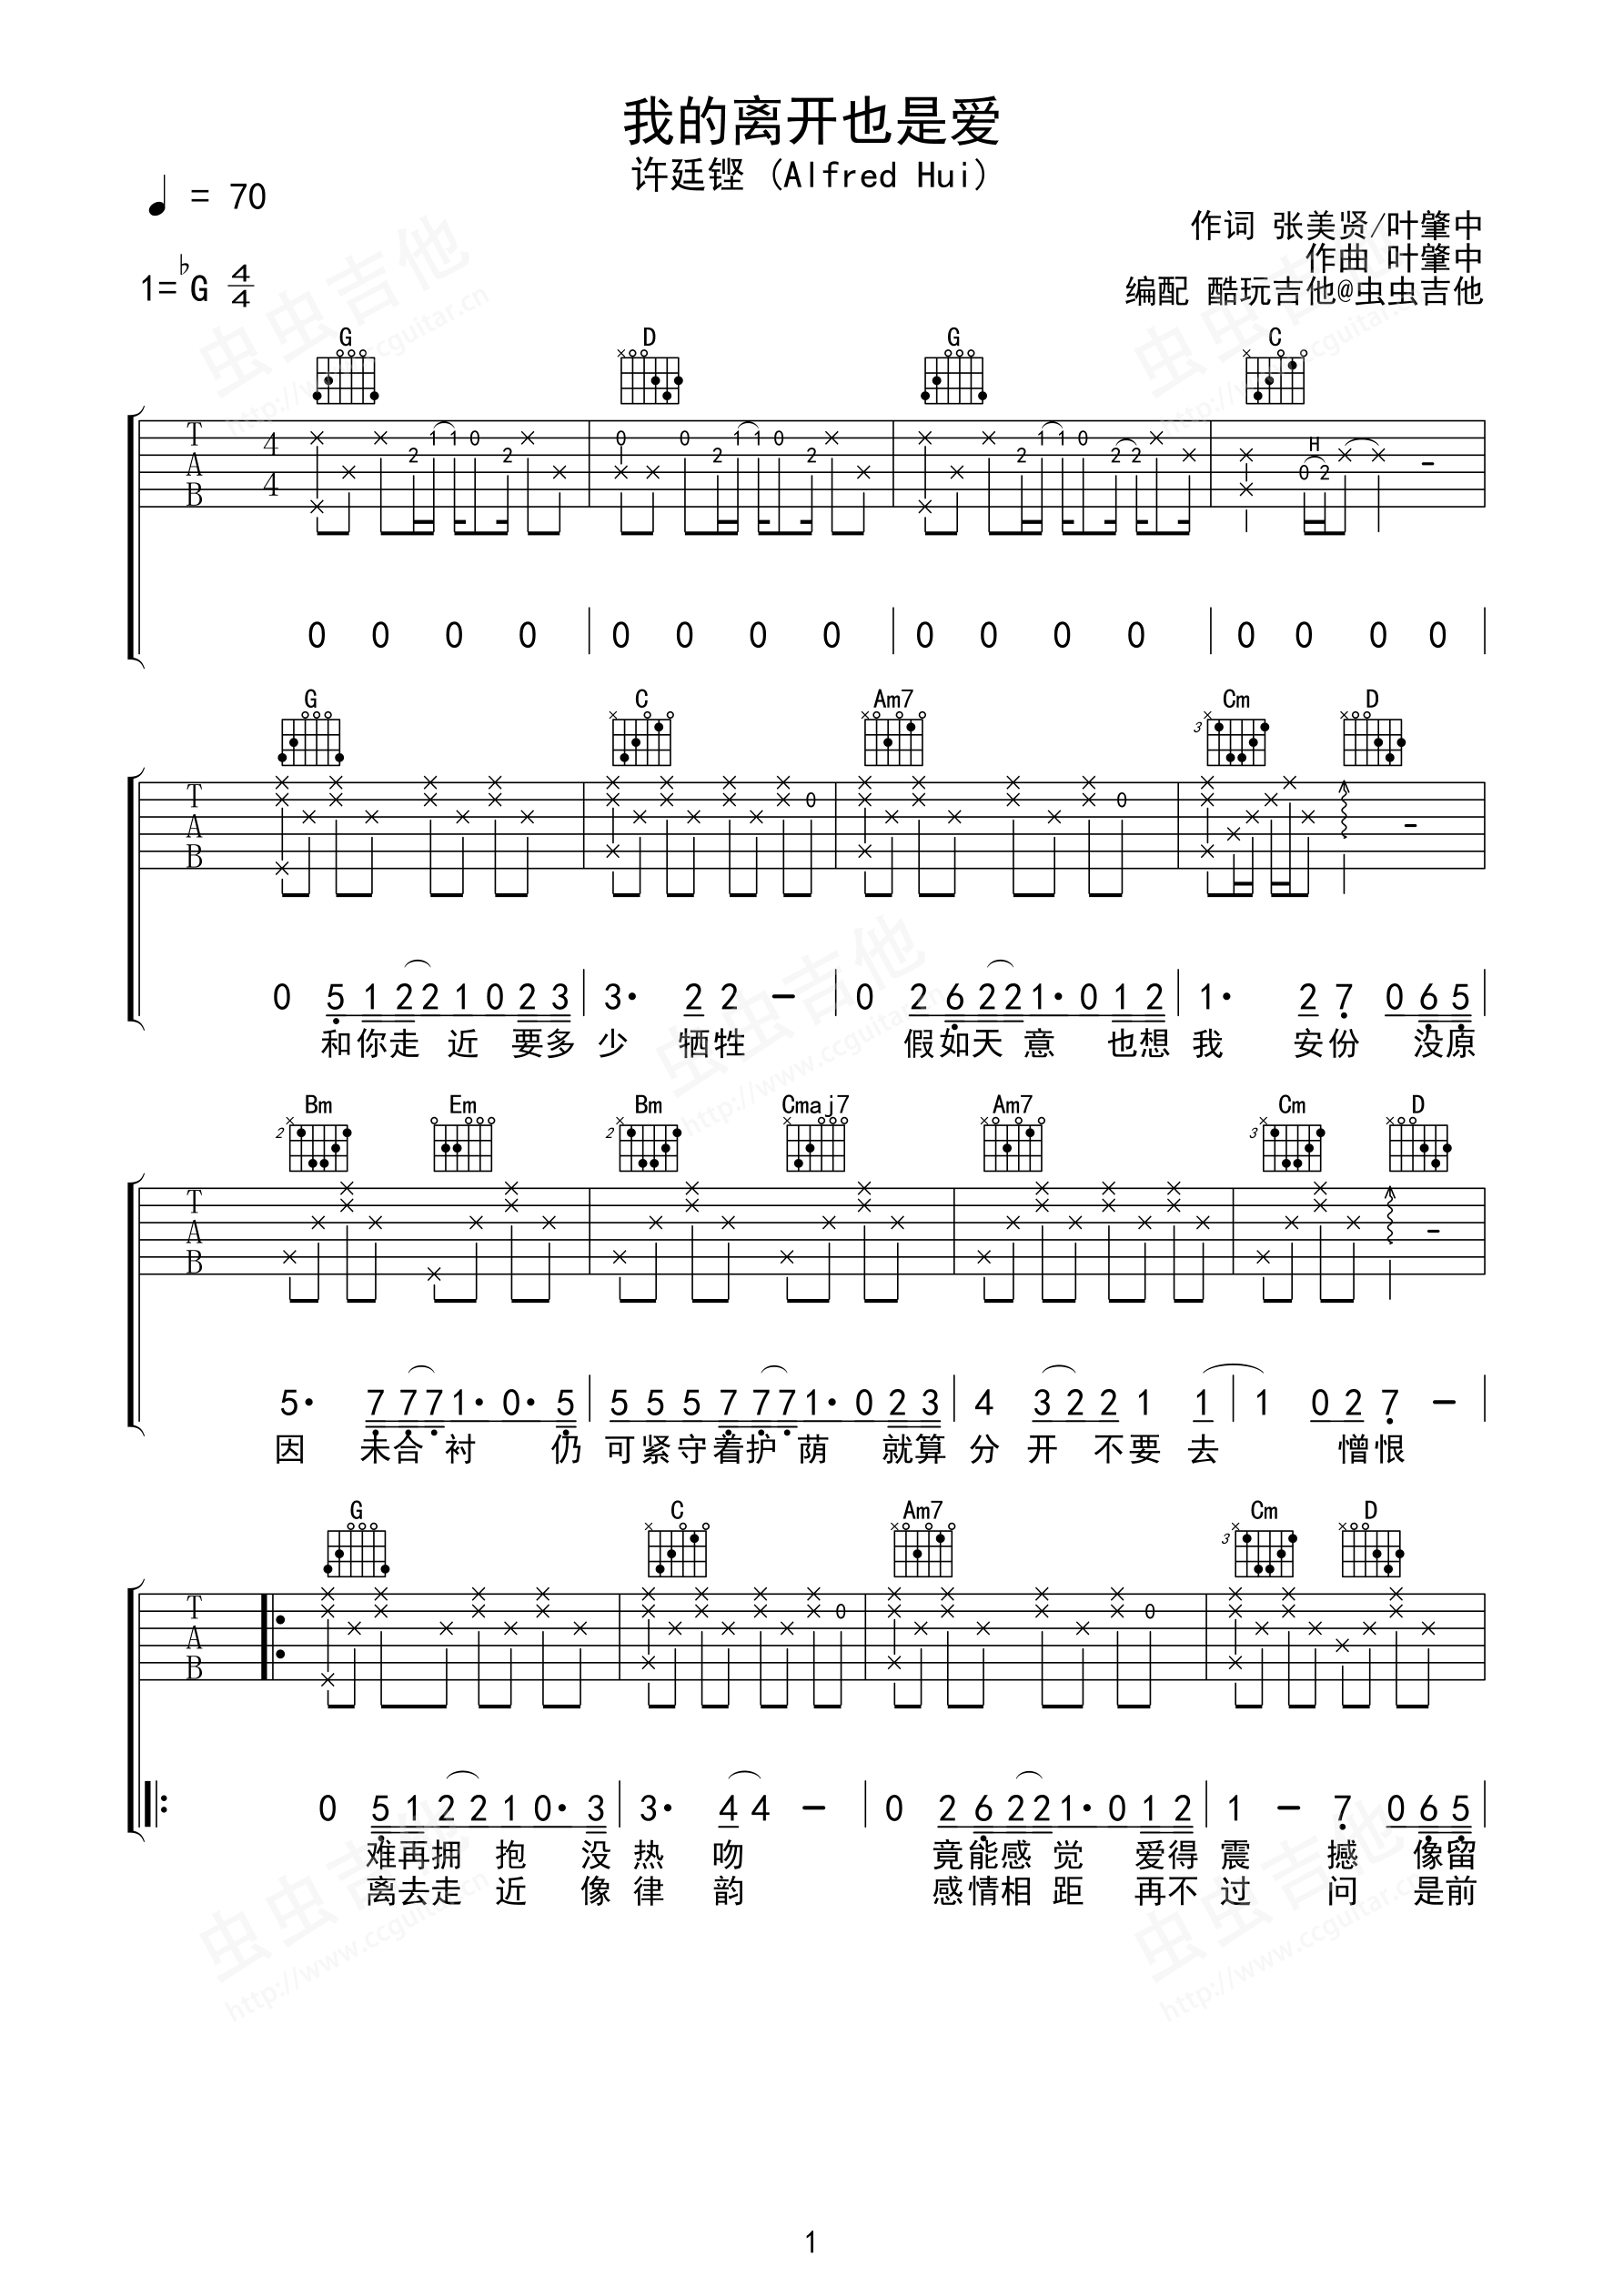 Rock-a-Bye Baby Easy Guitar Sheet Music And Tab With Chords And Lyrics | ubicaciondepersonas ...